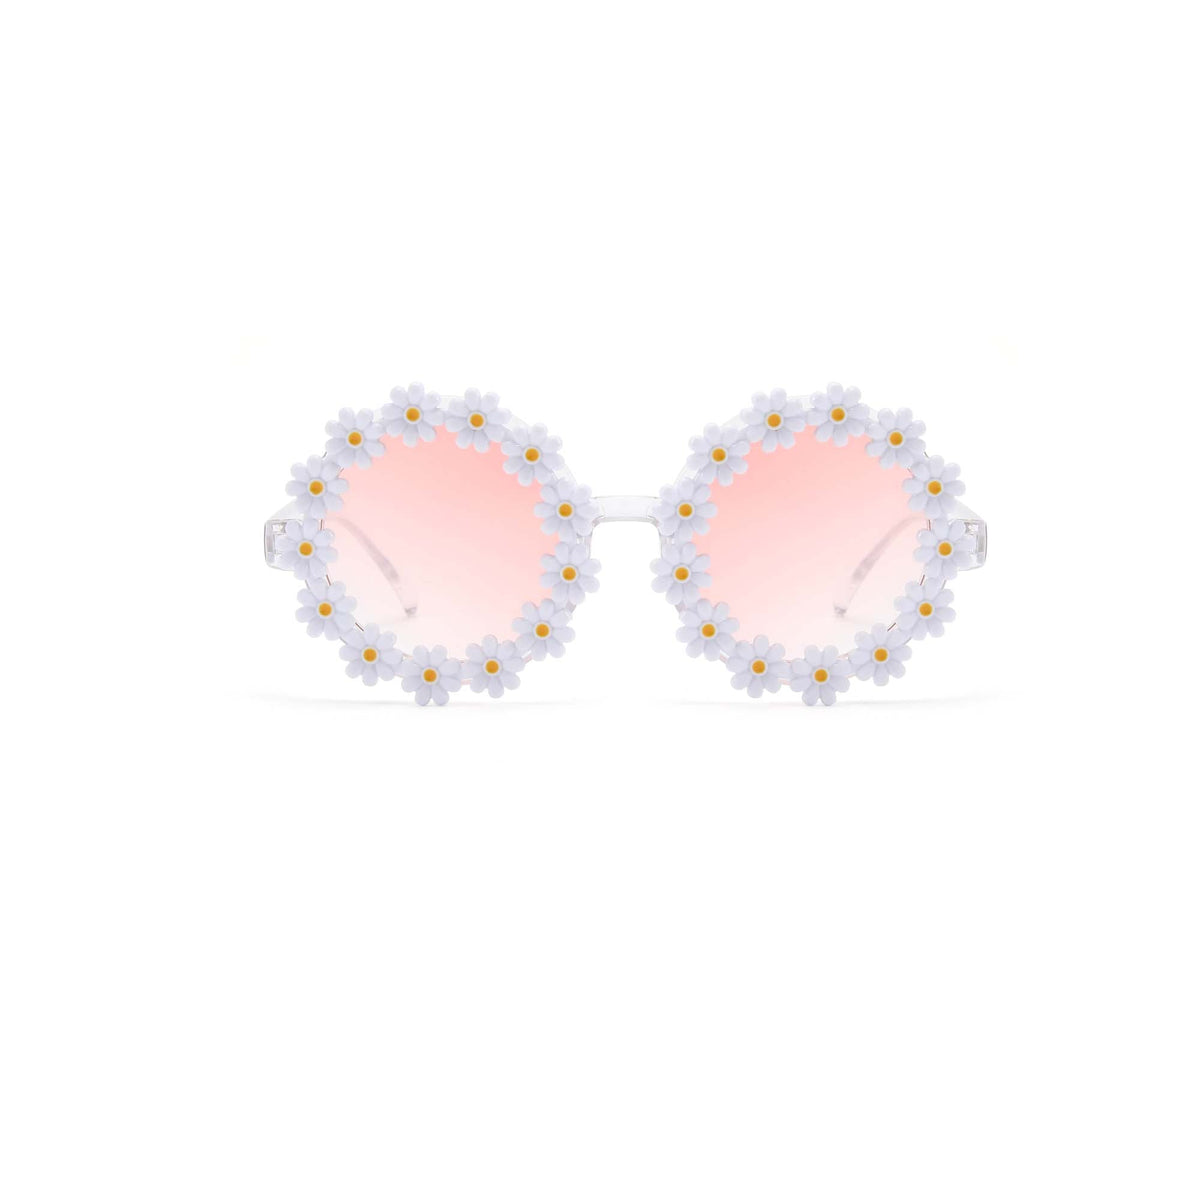 Taizhou Two Circles Trading Co. Ltd. Costume Accessories White Daisy Sunglasses for Adults